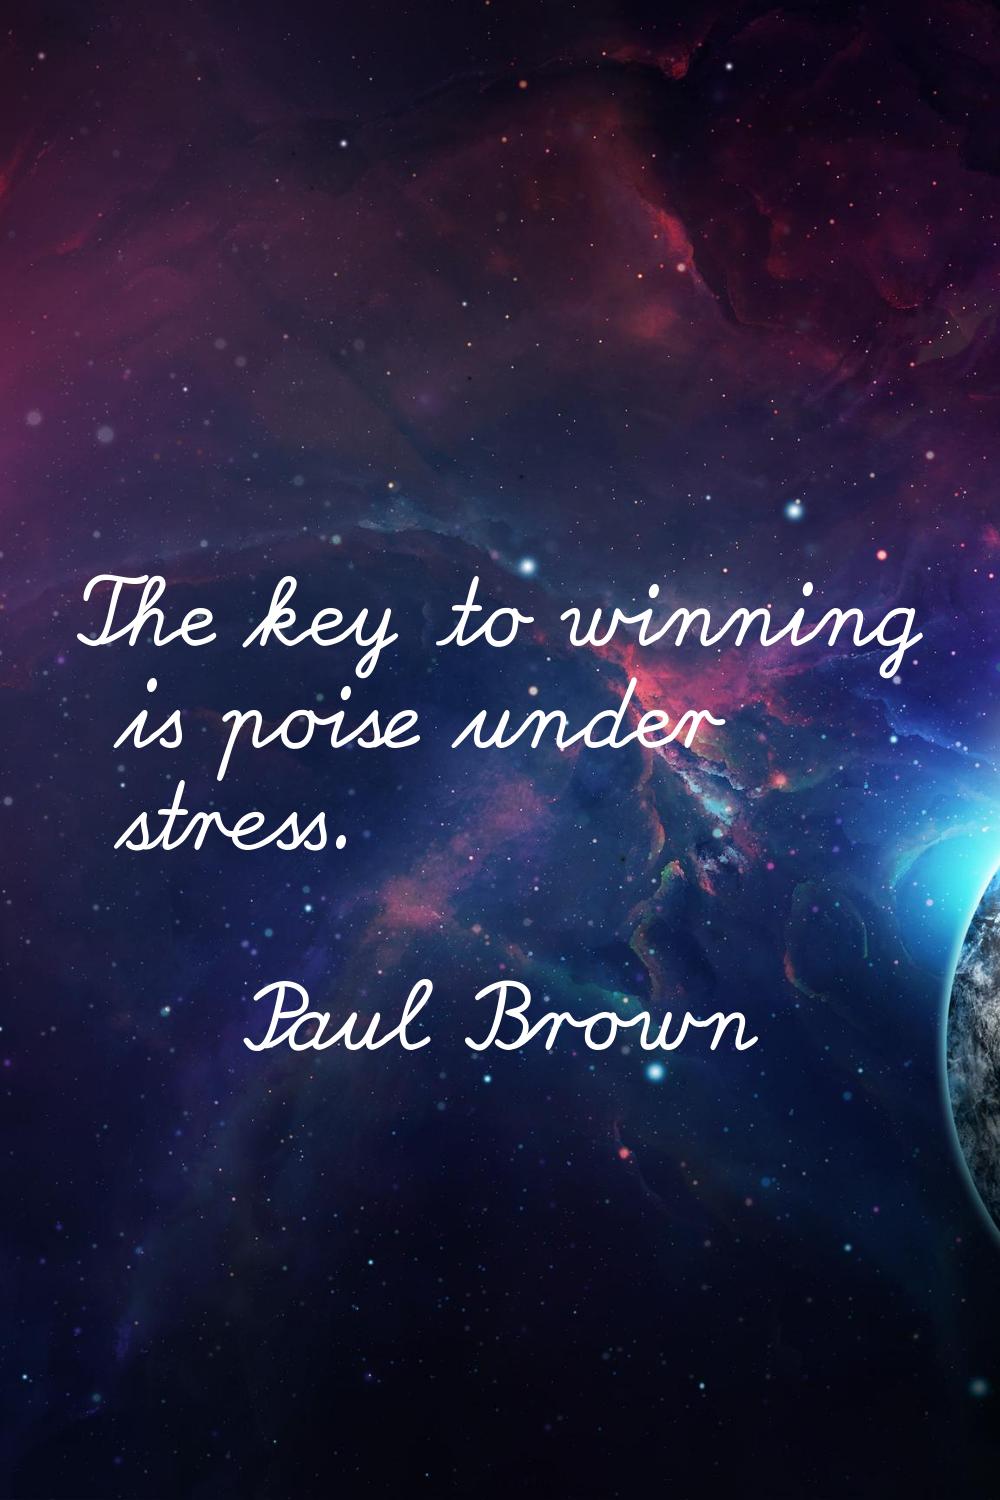 The key to winning is poise under stress.